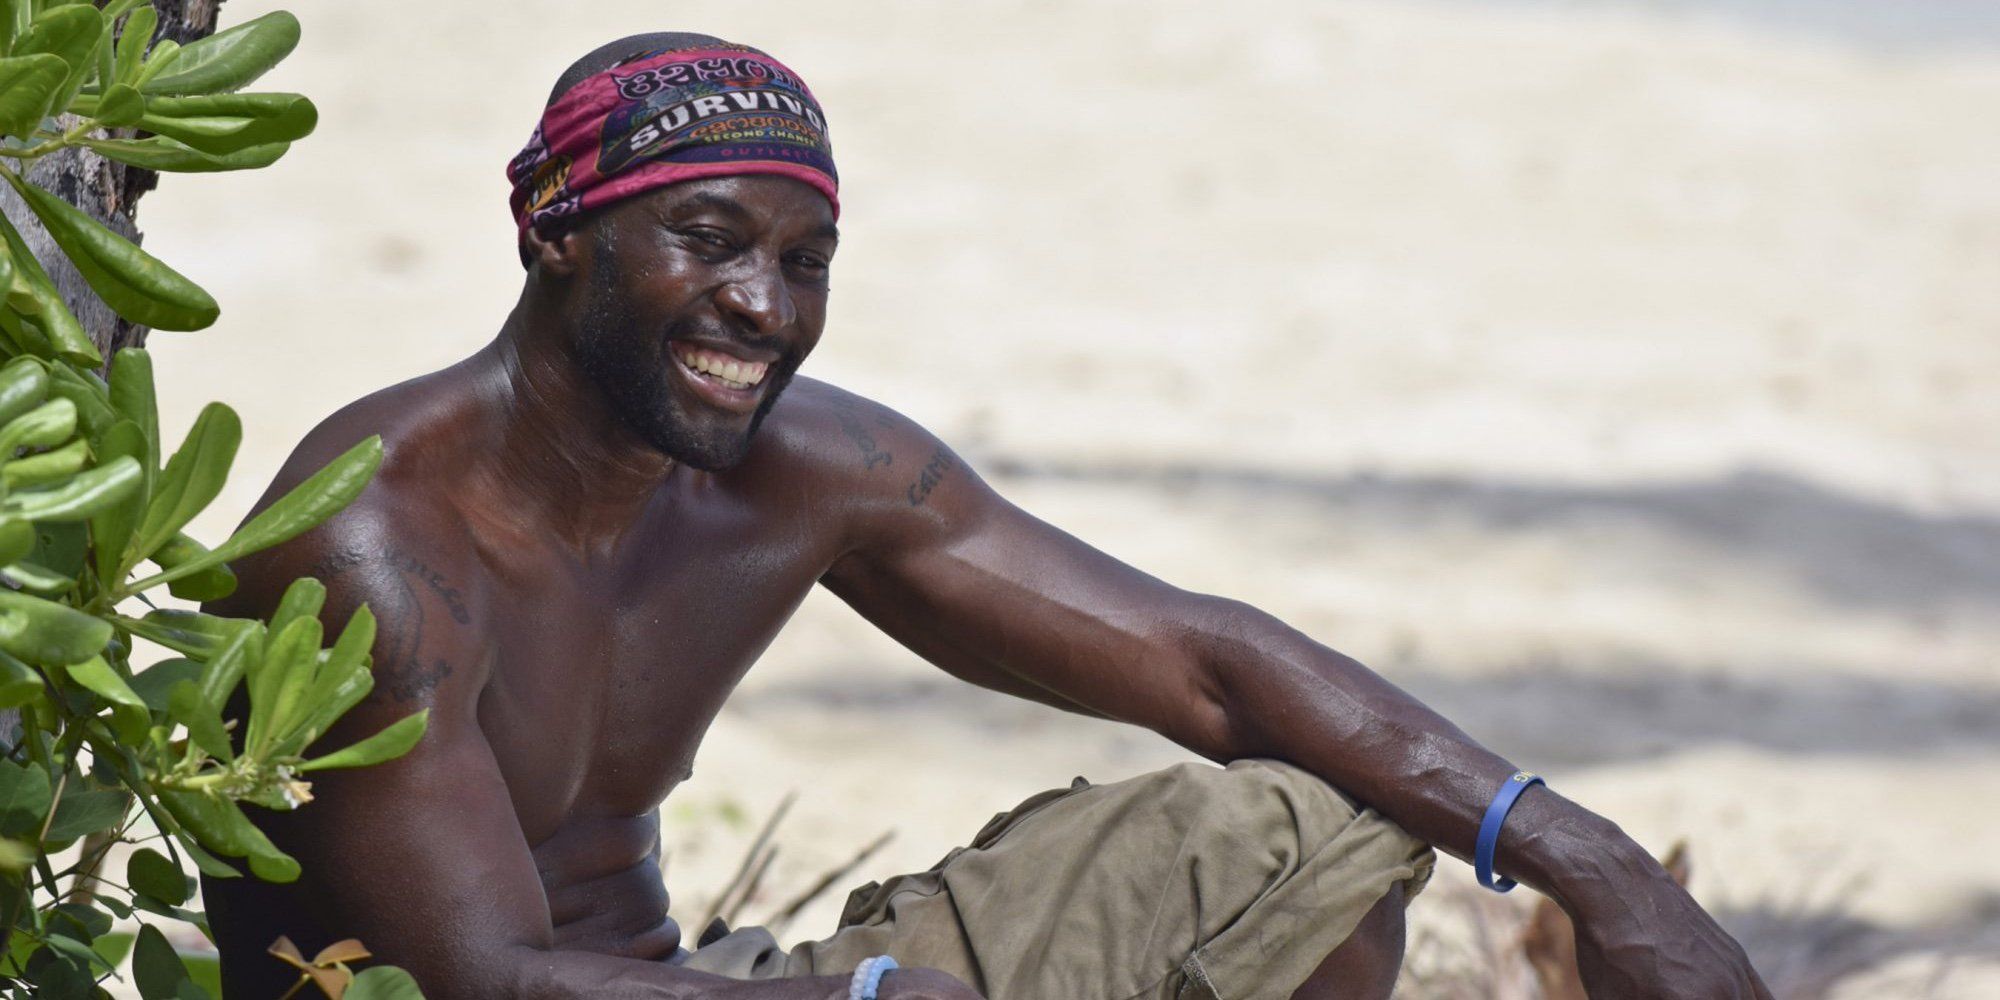 Jeremy from Survivor smiling at the camera